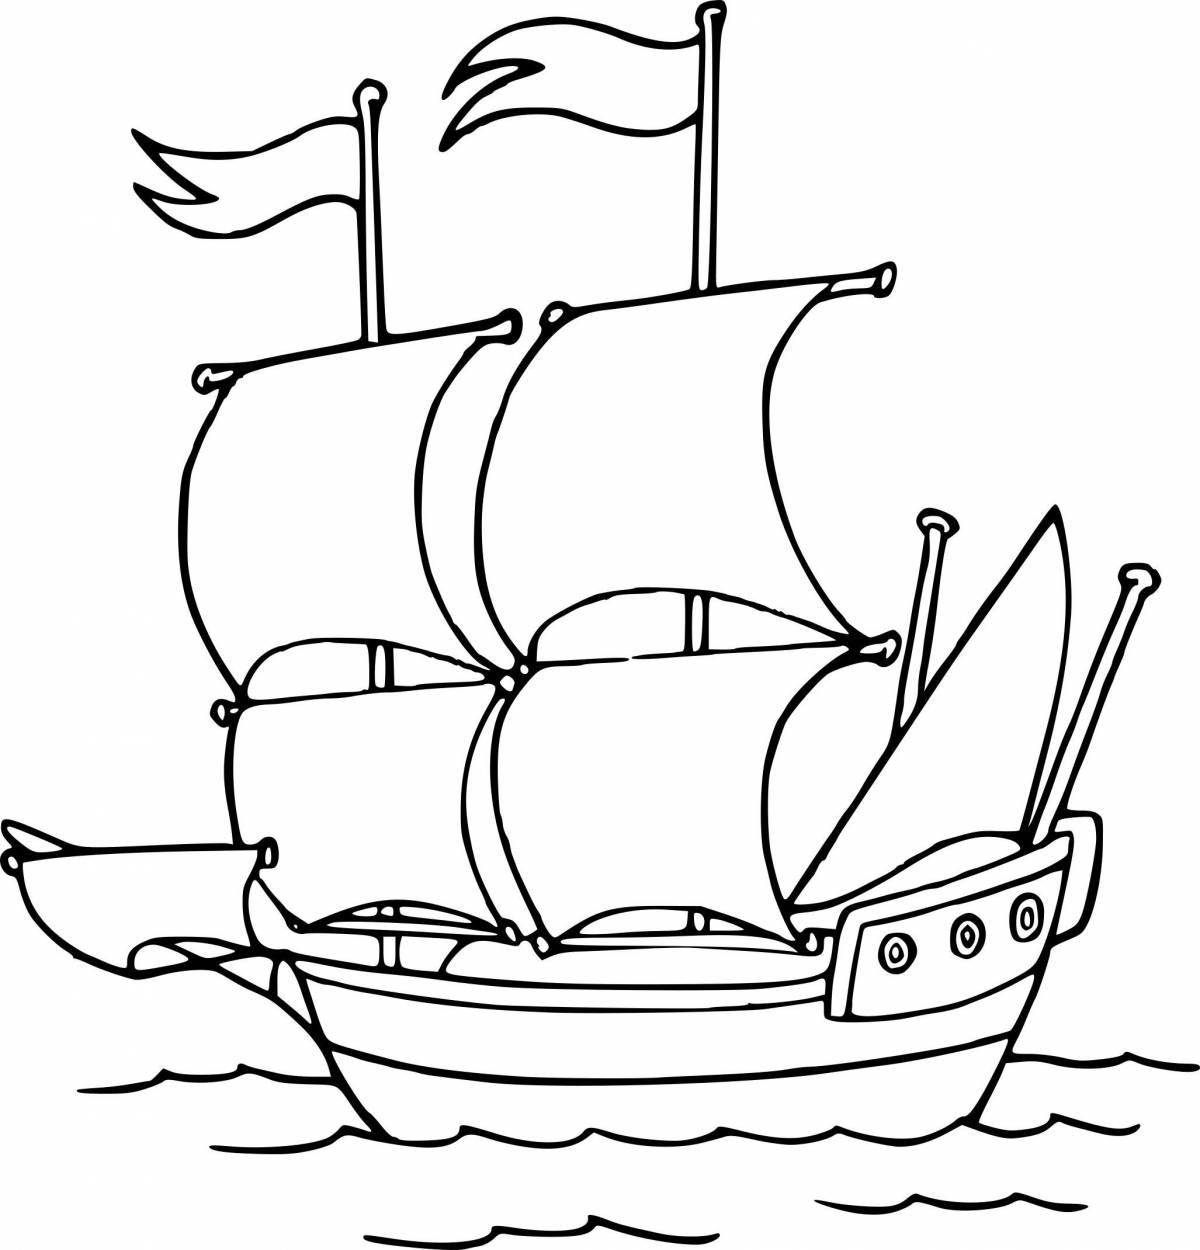 Outstanding ship coloring book for 7 year olds